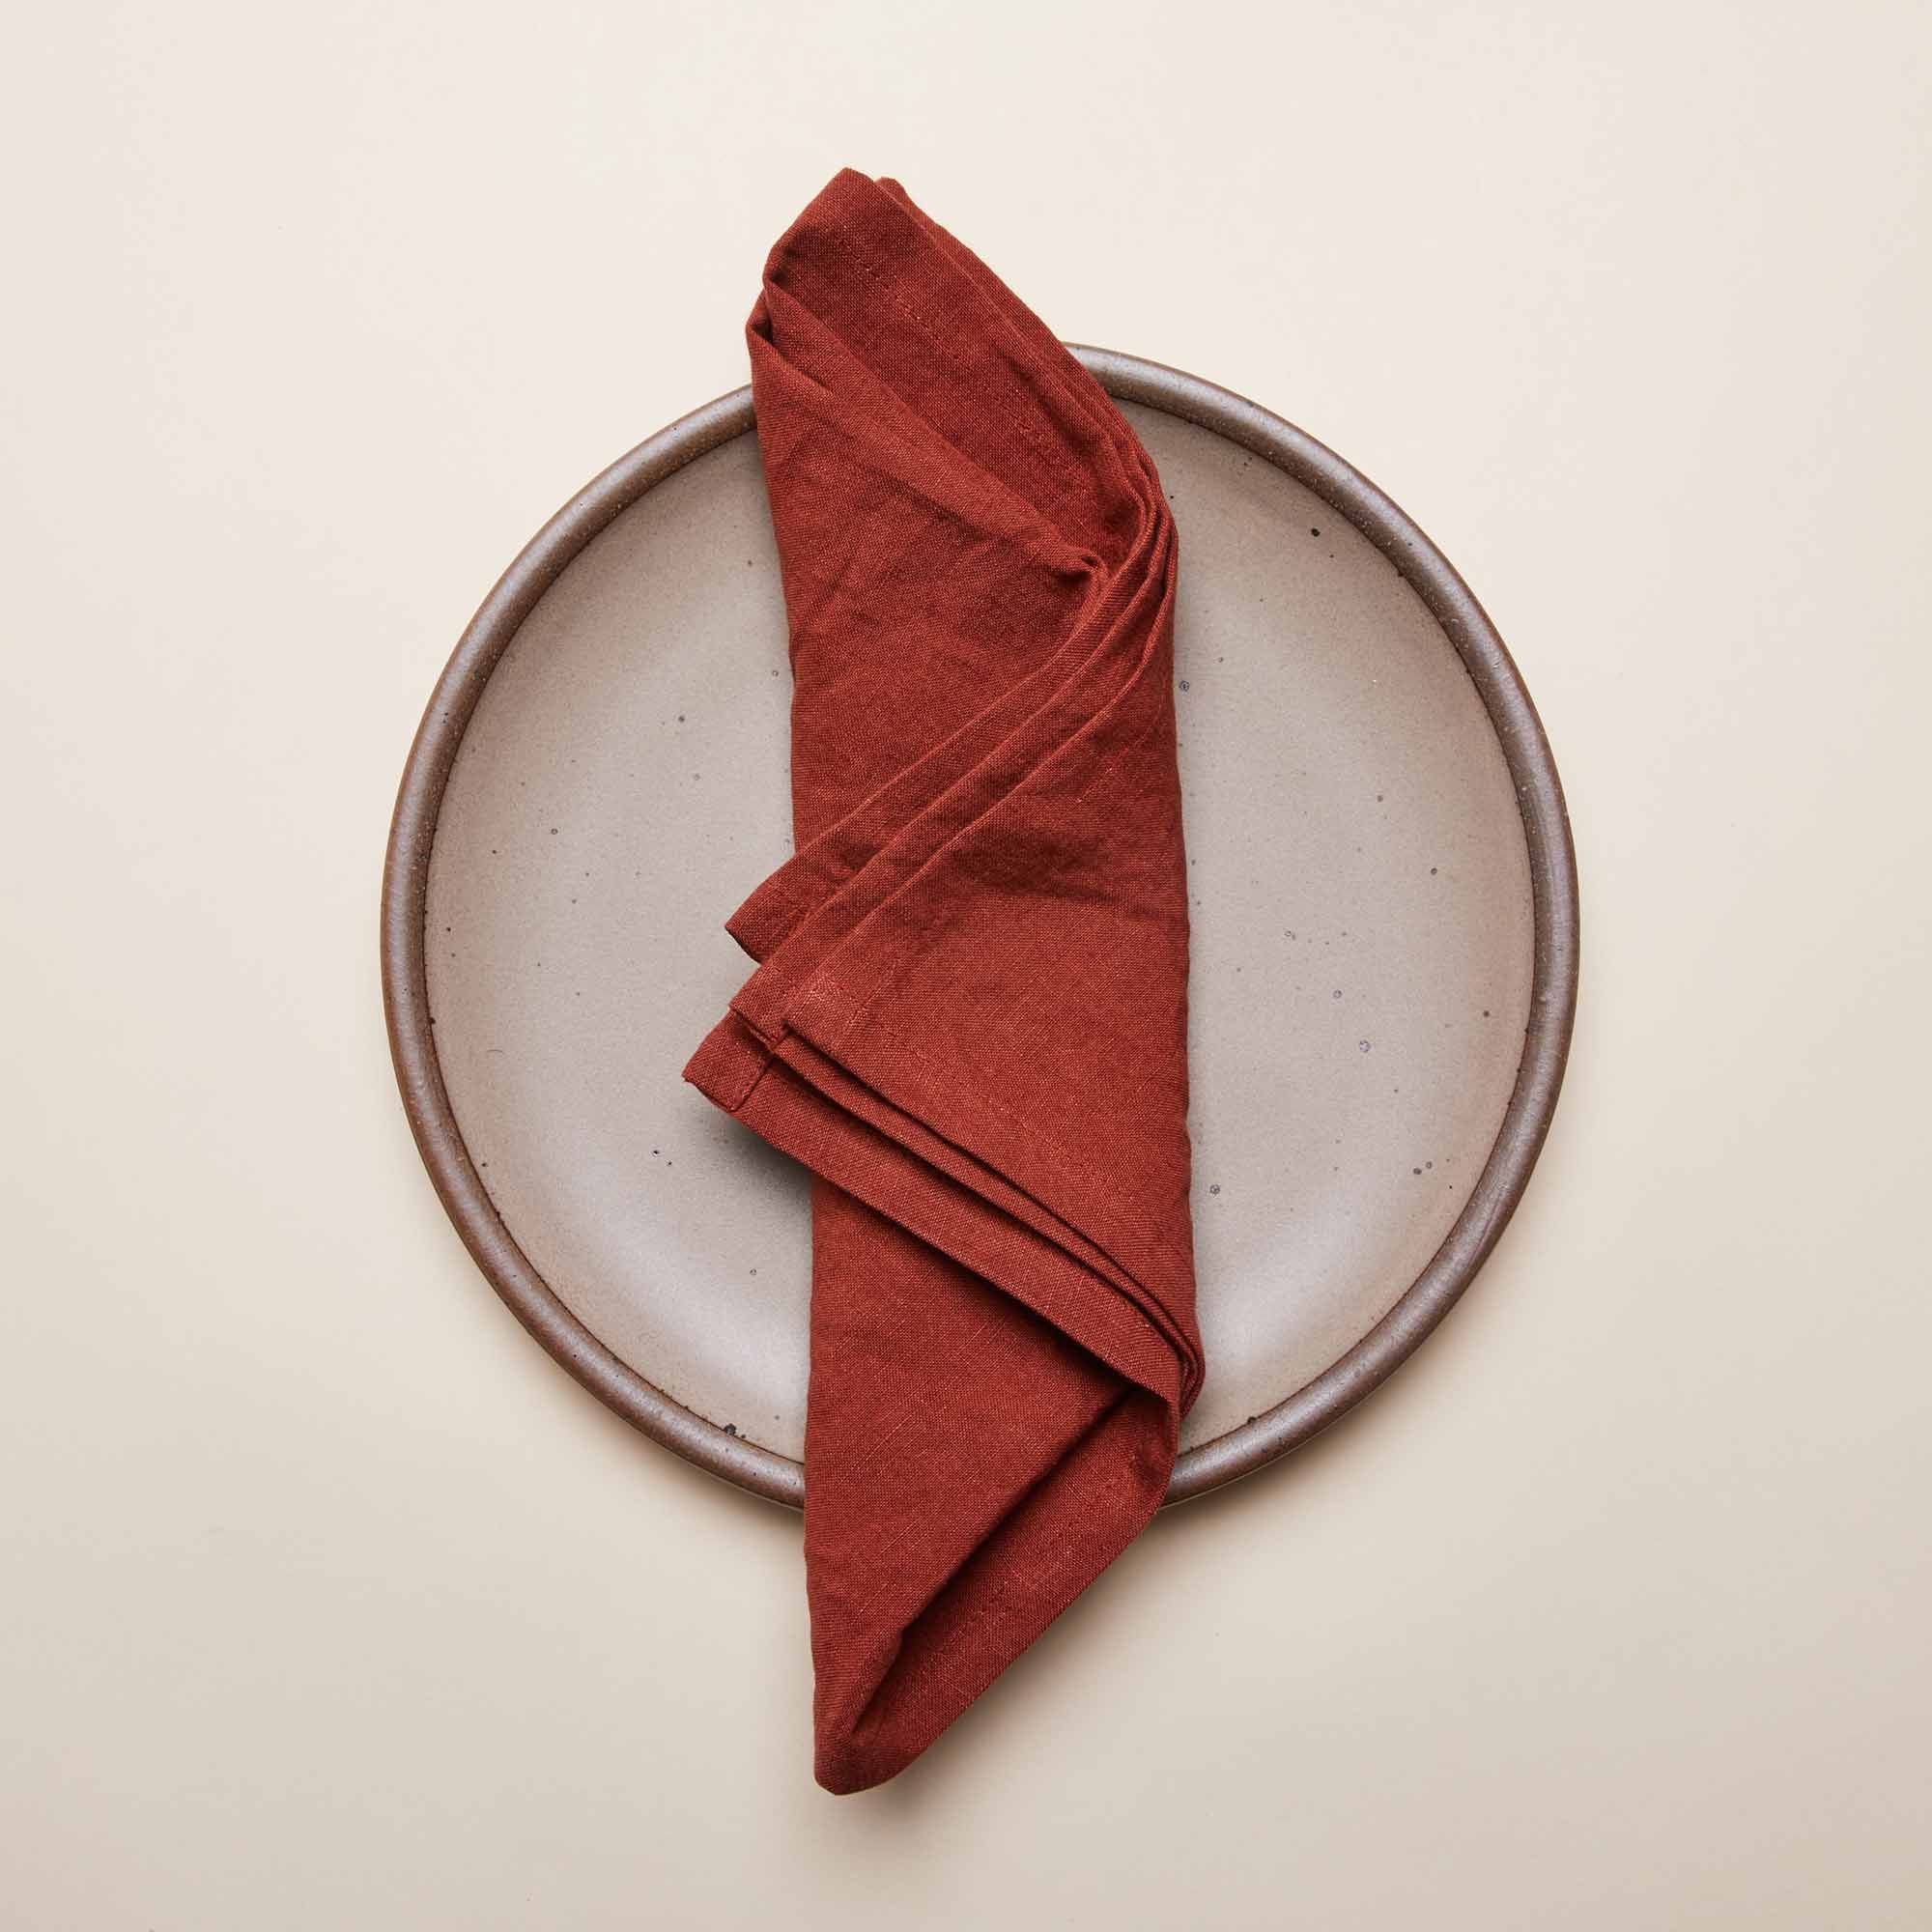 An Amaro napkin folded into quarters on an East Fork Dinner Plate in Morel